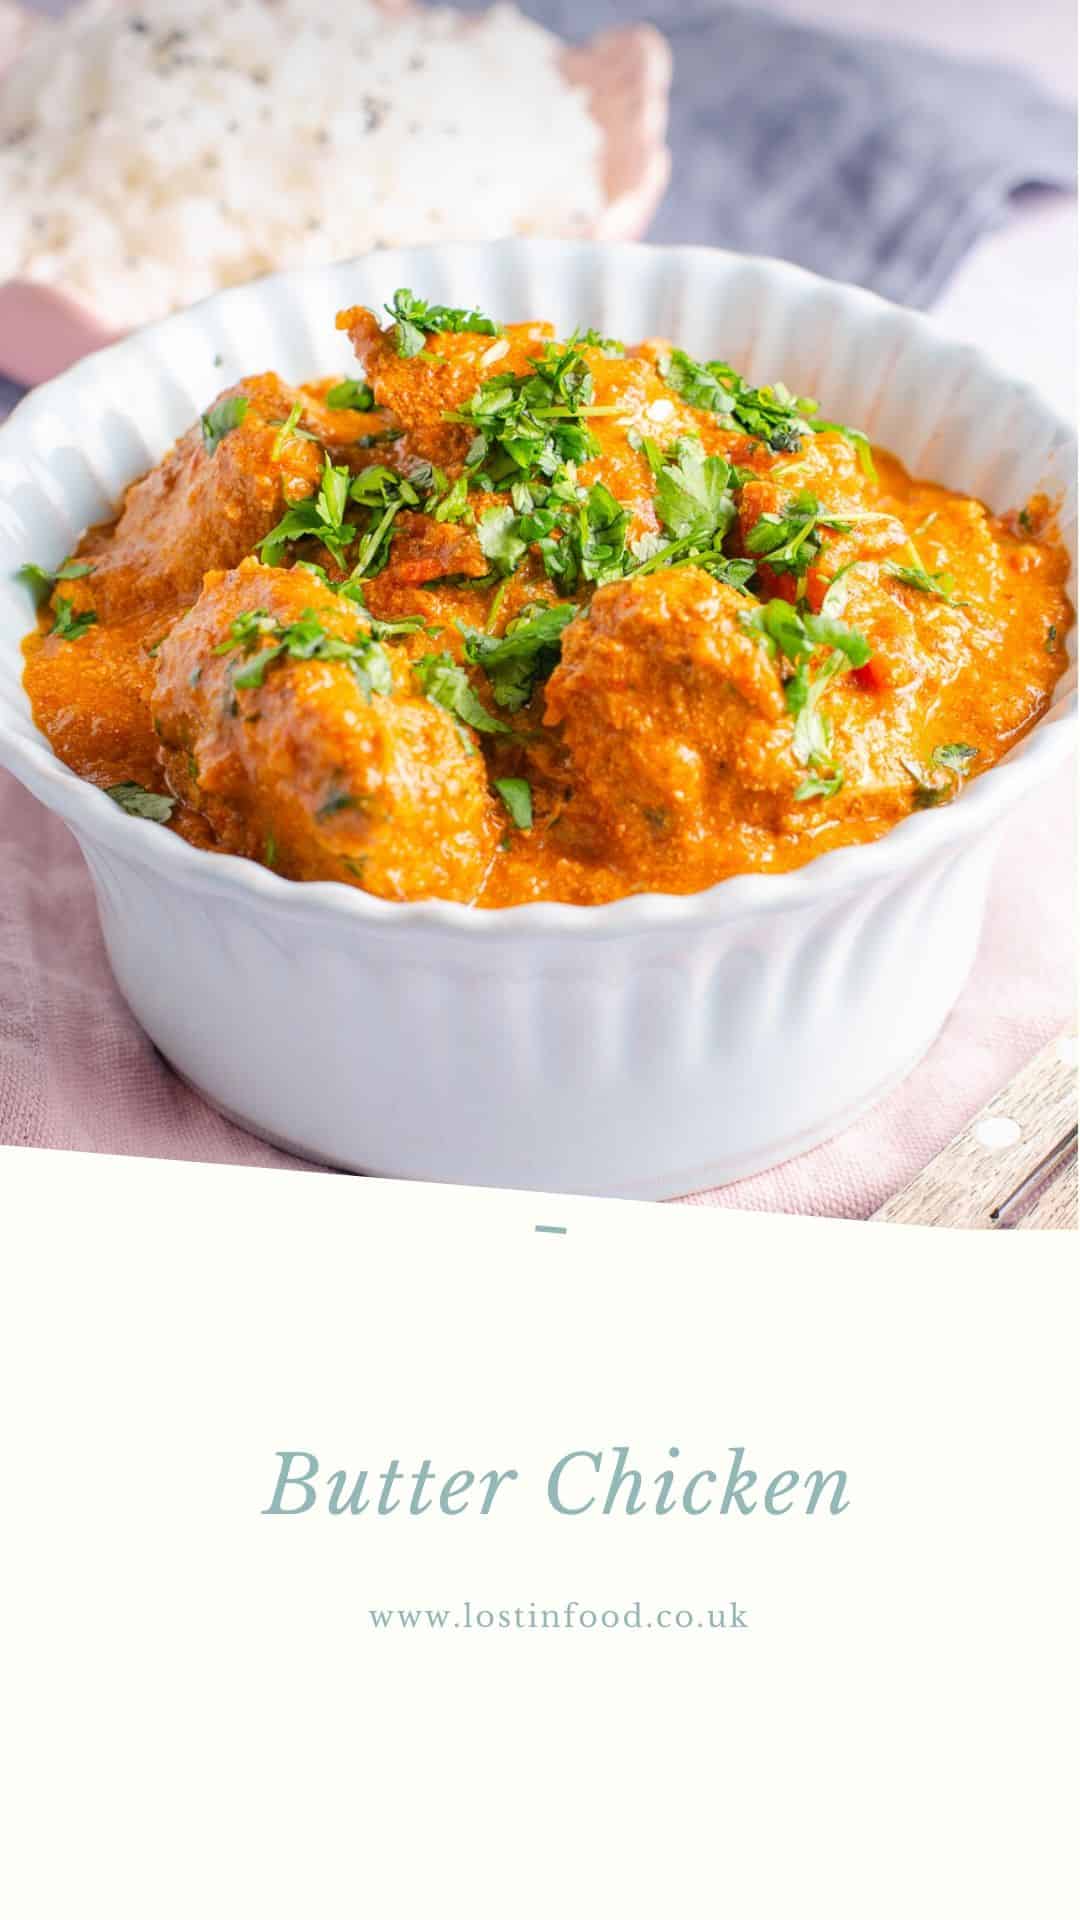 A pinterest image of a bowl of butter chicken topped with coriander and served with a bowl of steamed rice.